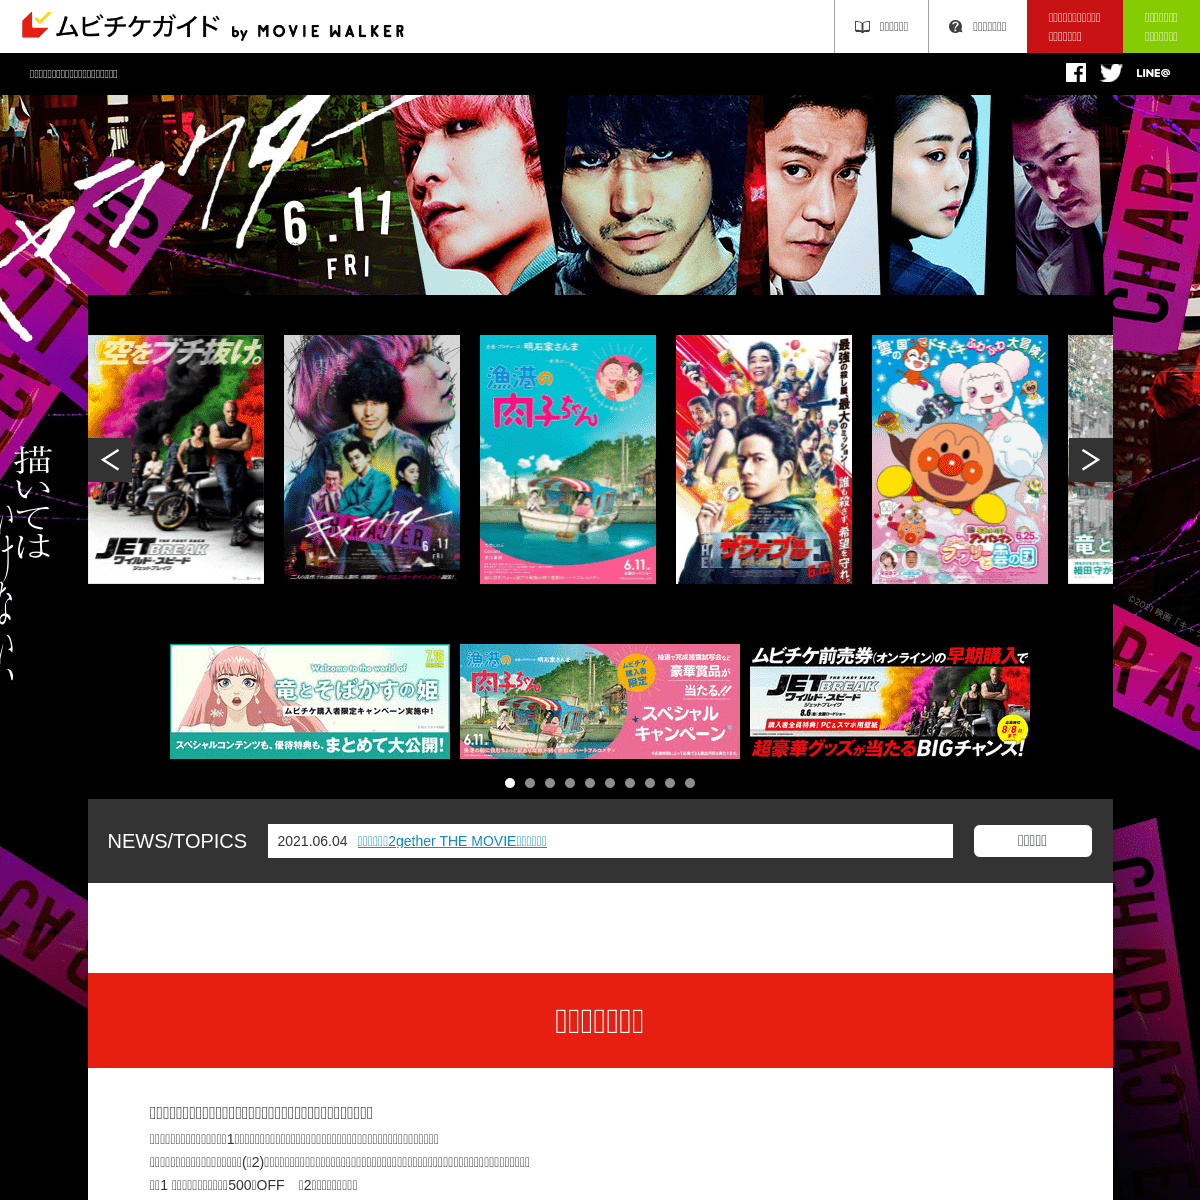 A complete backup of https://movieticket.jp